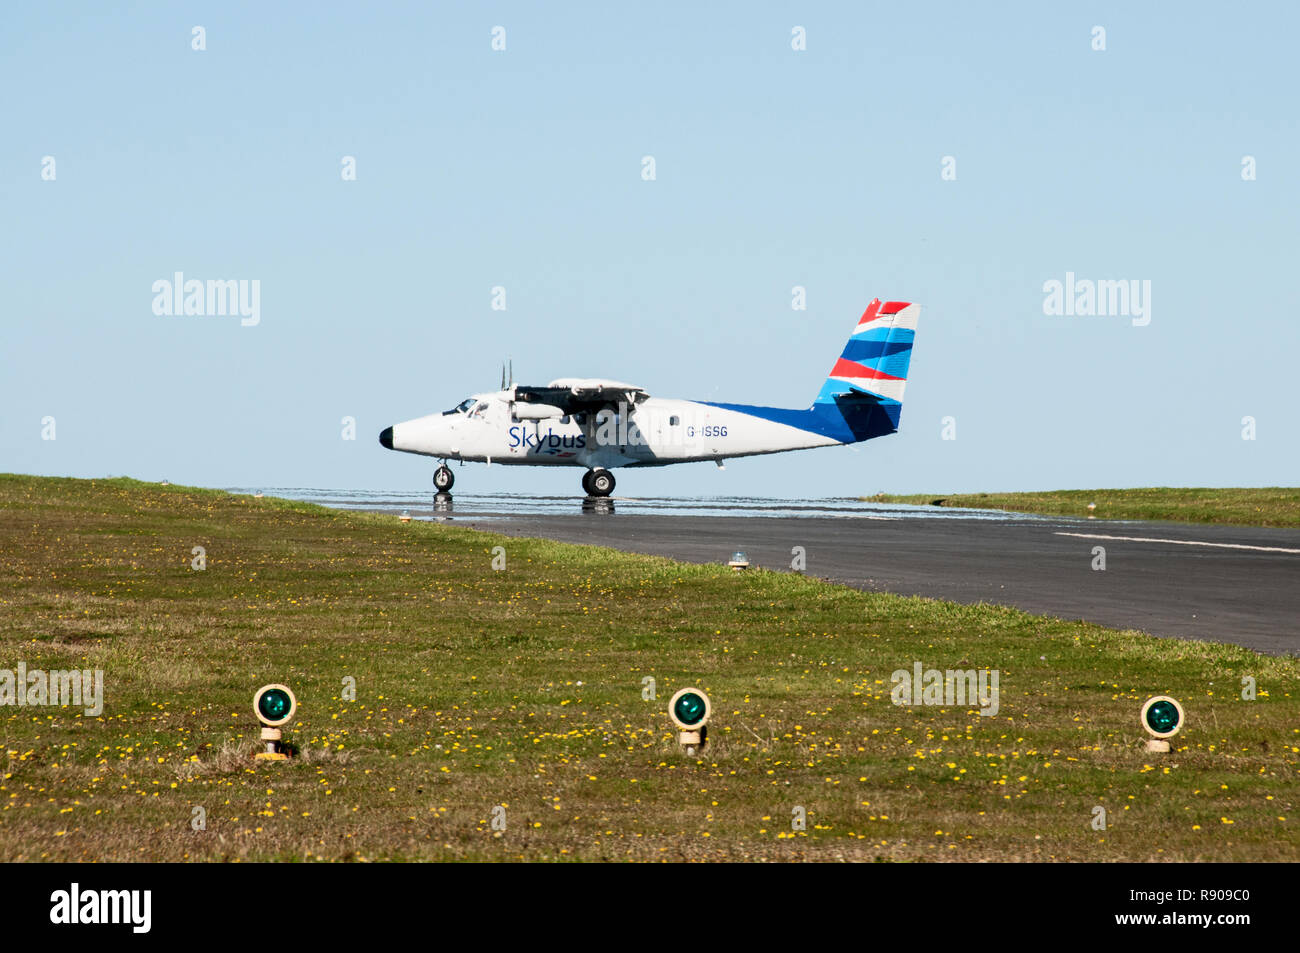 Around the UK - Flying to the Isles of Scilly by Skybus Stock Photo